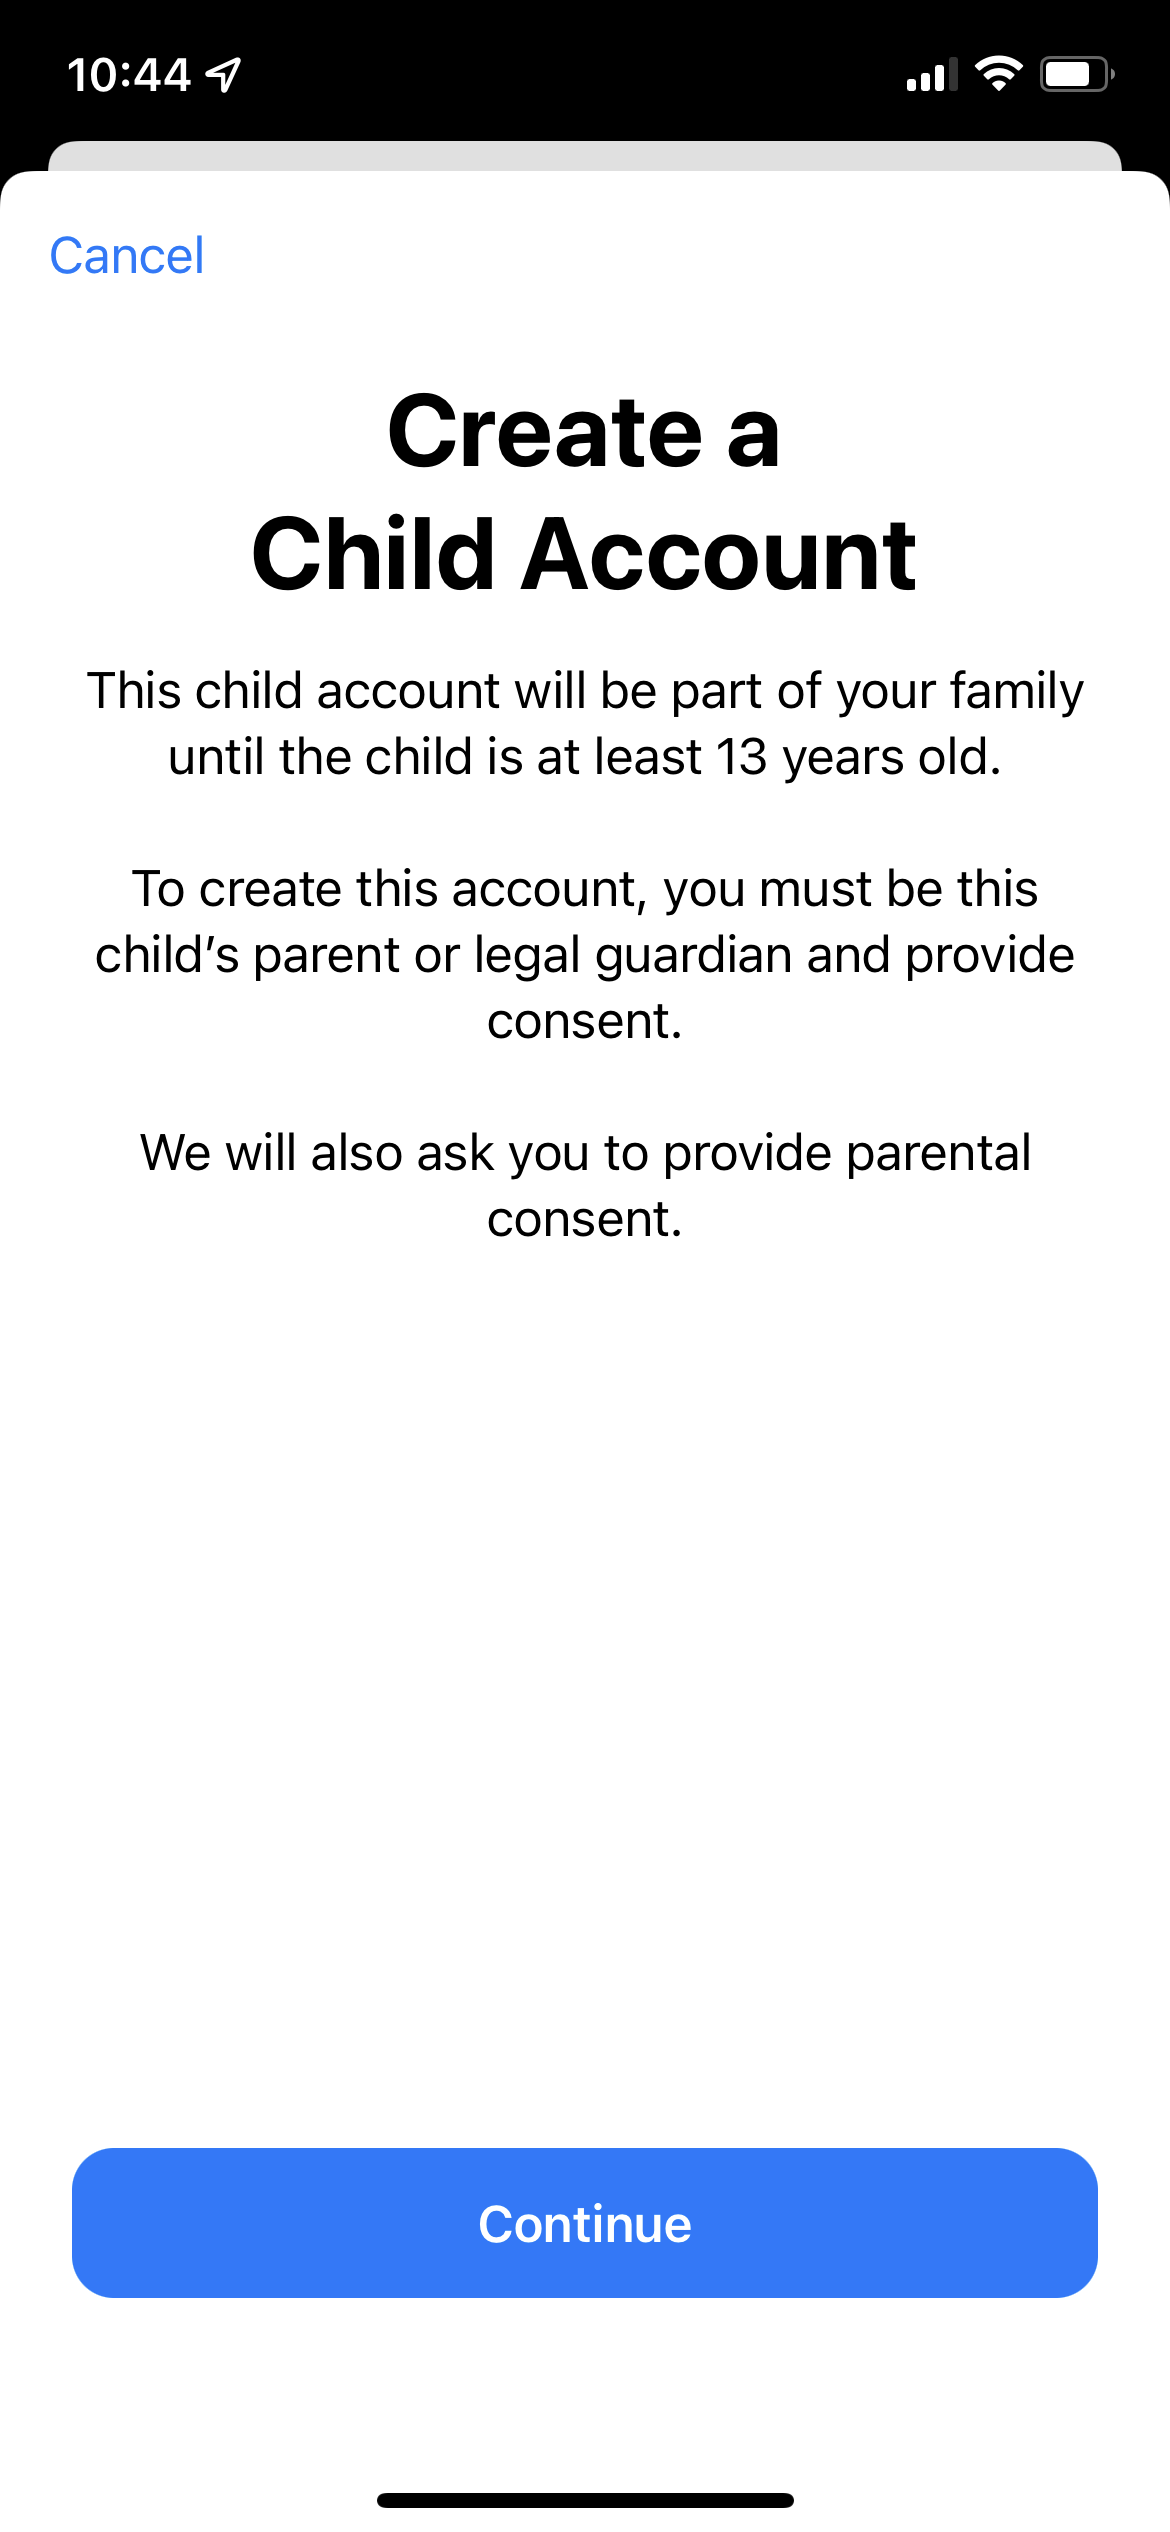 Just putting it out there, you need a parent account or an account